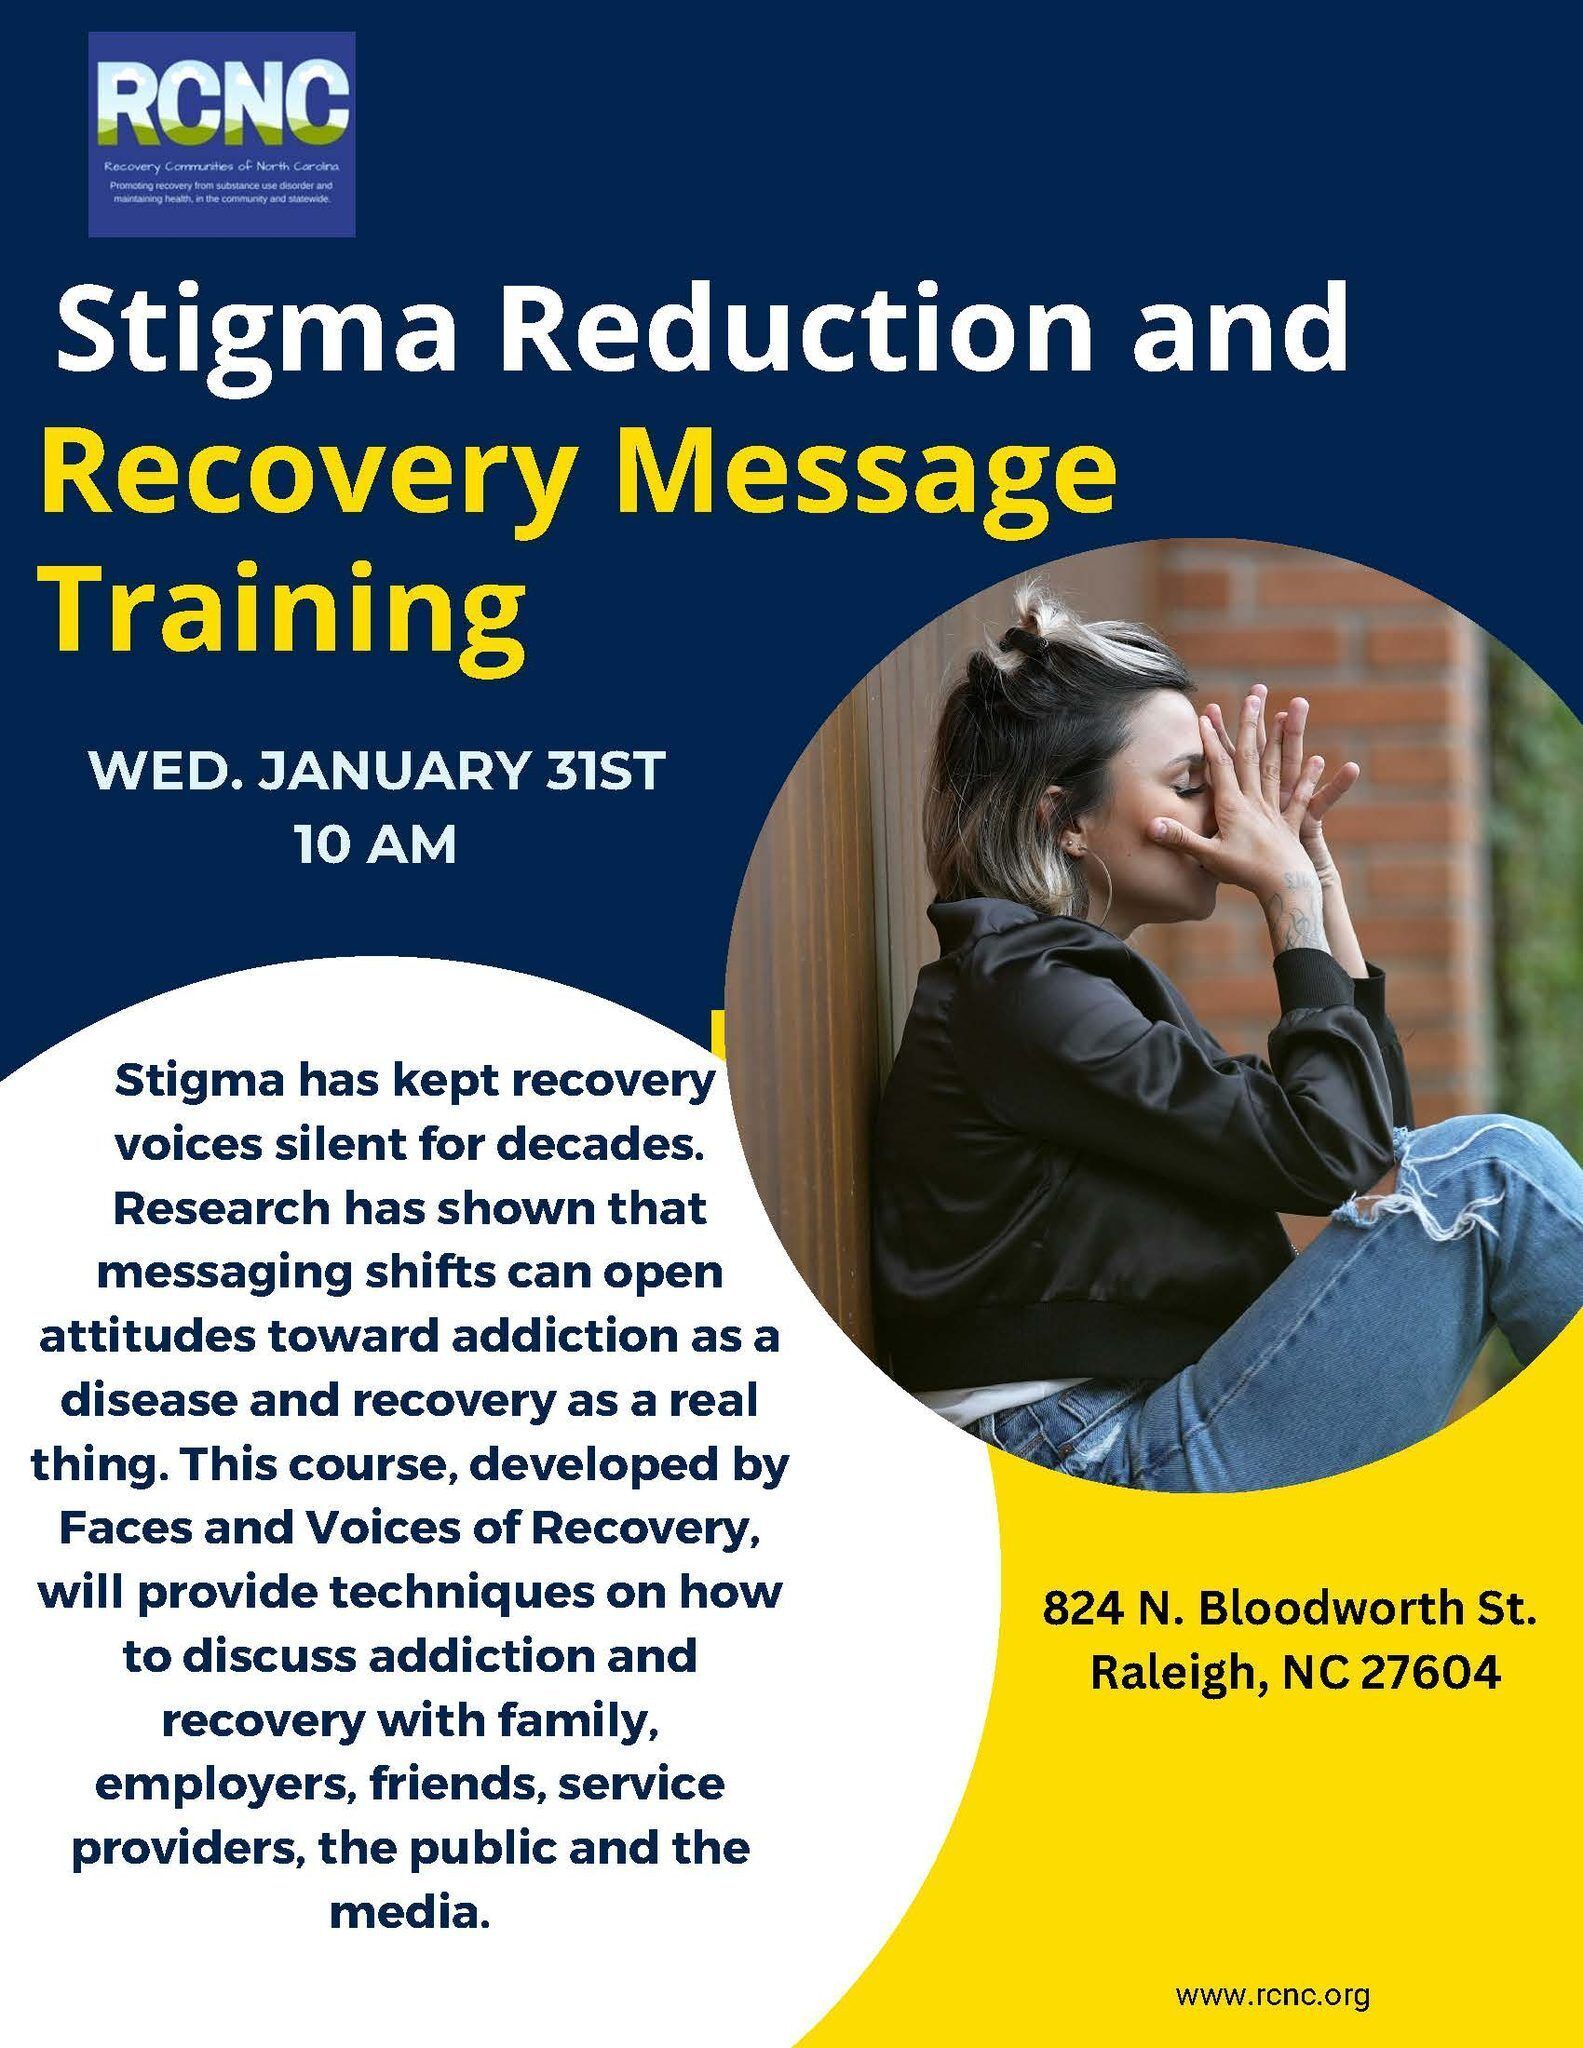 Breaking the Silence: RCNC's Stigma Reduction and Recovery Message Training on January 31st